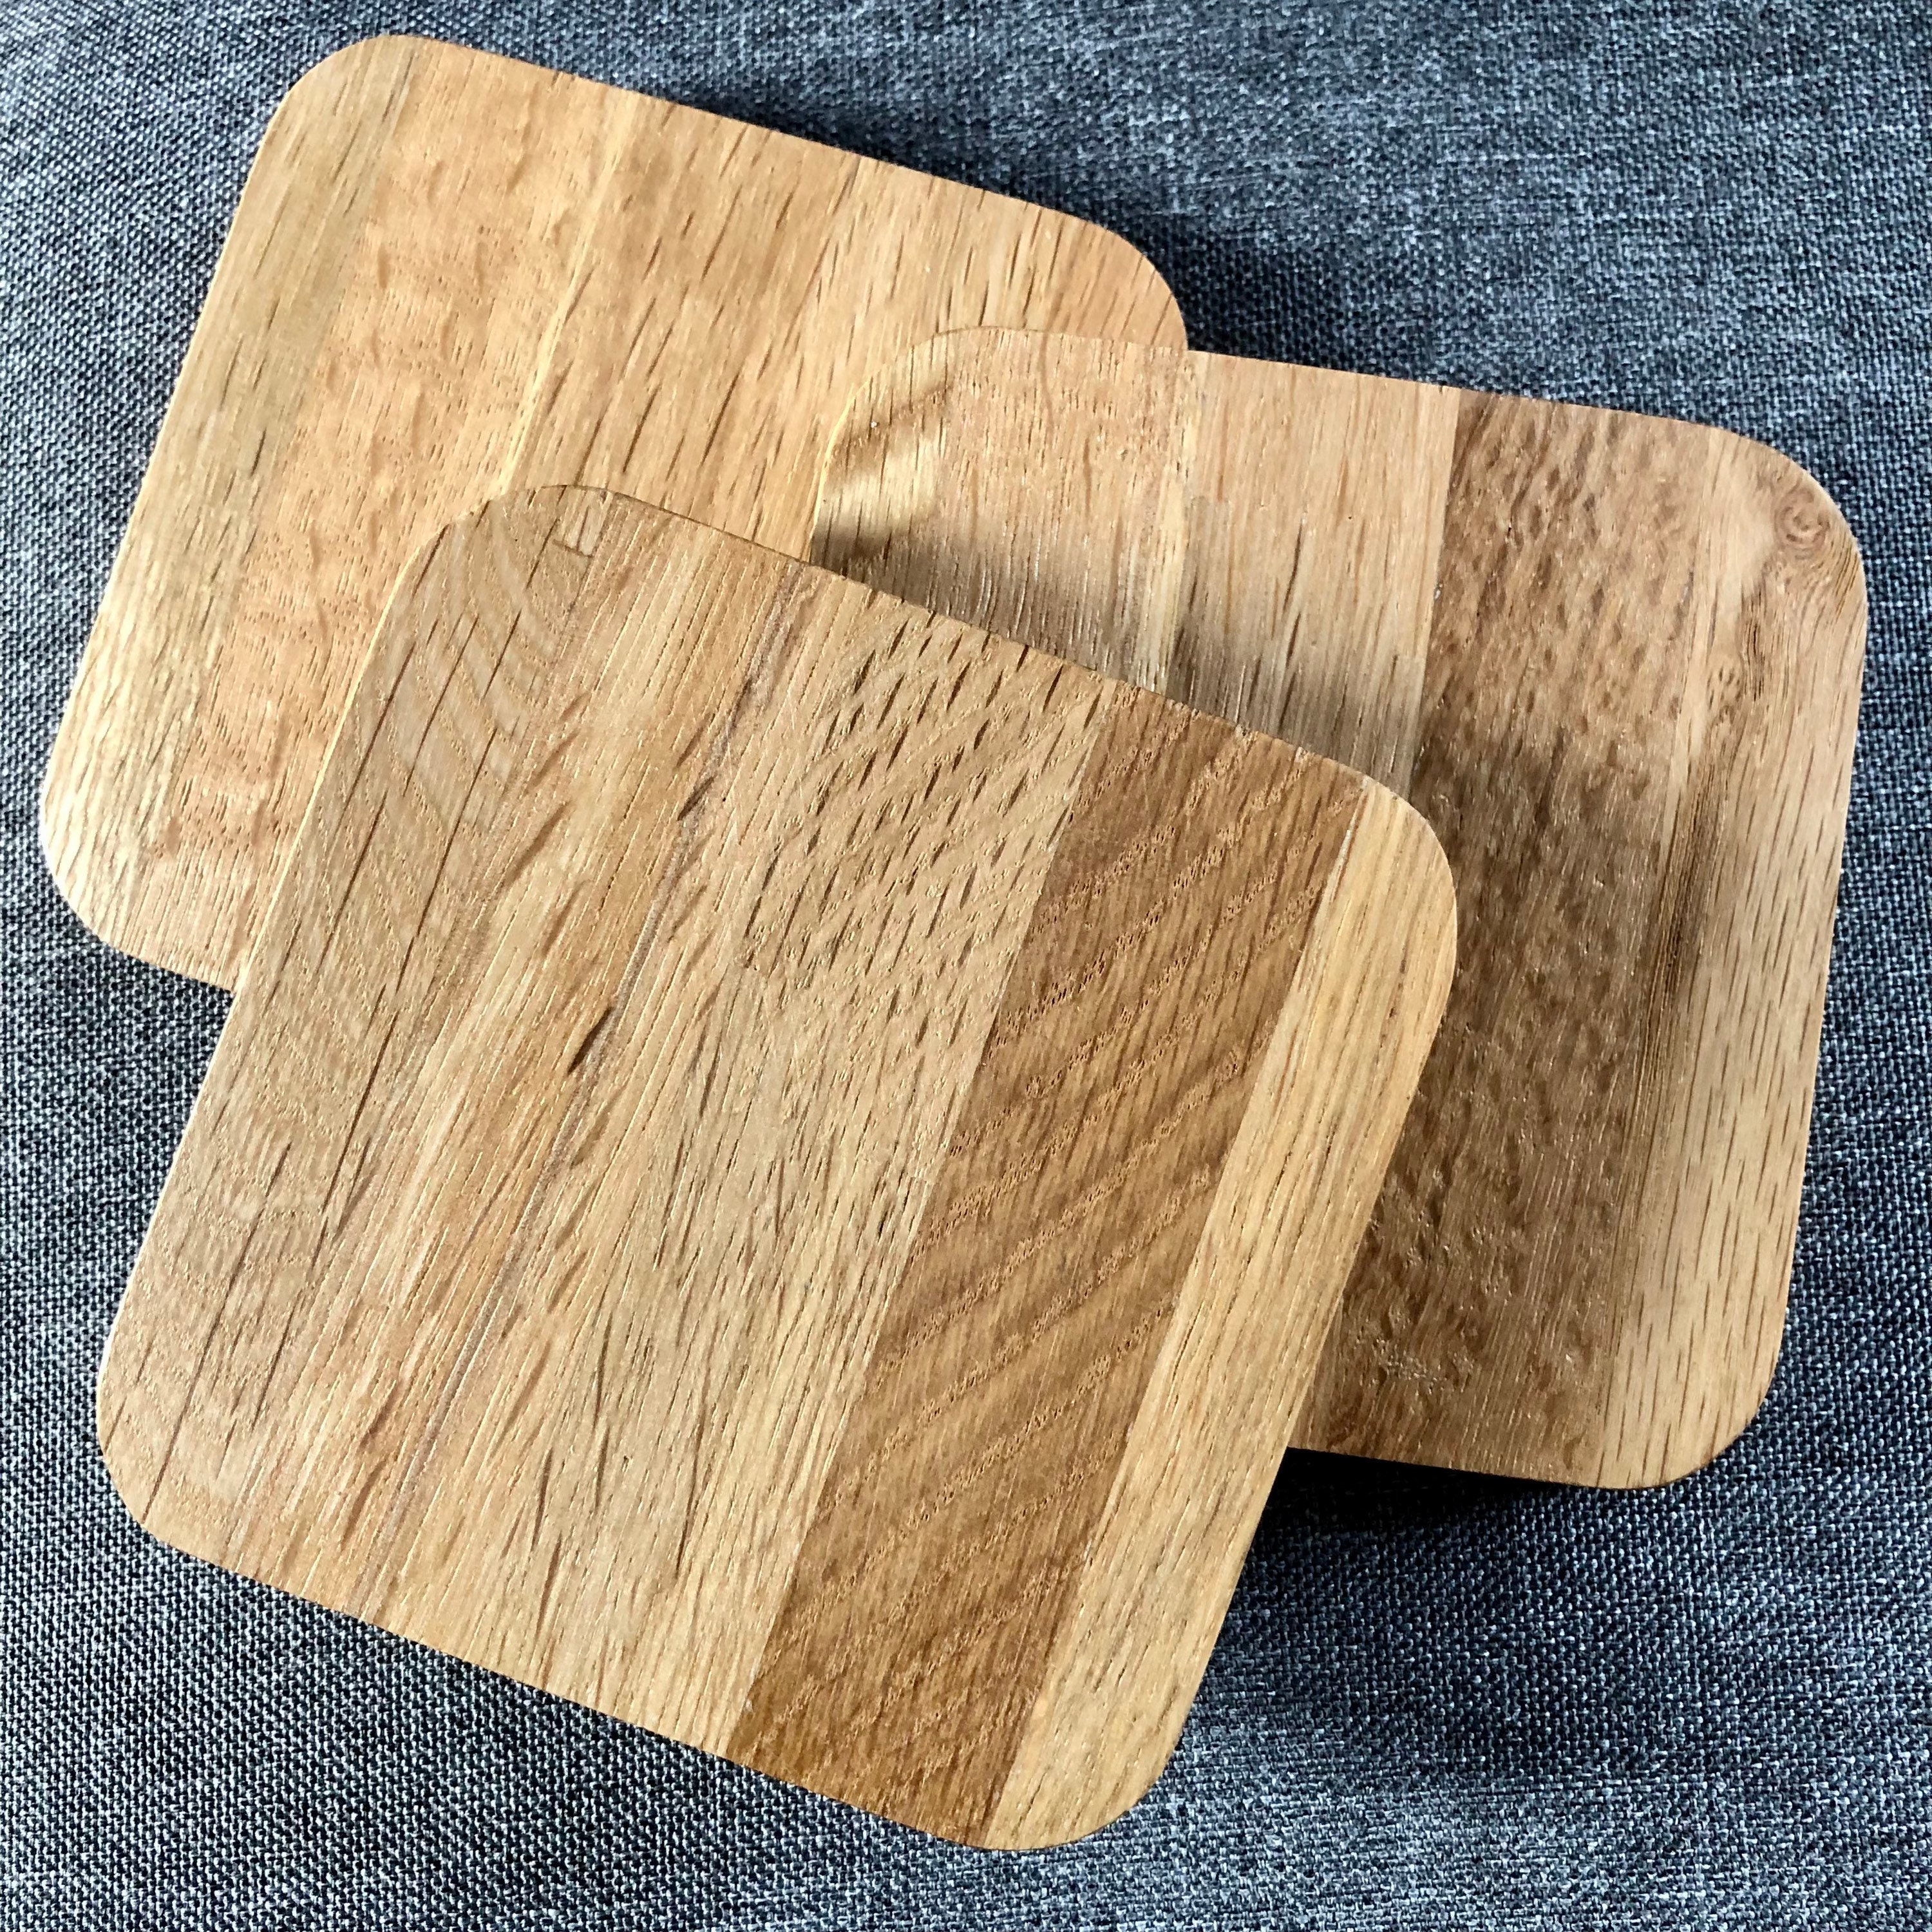 Solid Oak Placemats Set of 2, Handmade in London, Wood Placemats, Wooden  Placemats, Housewarming Gift 